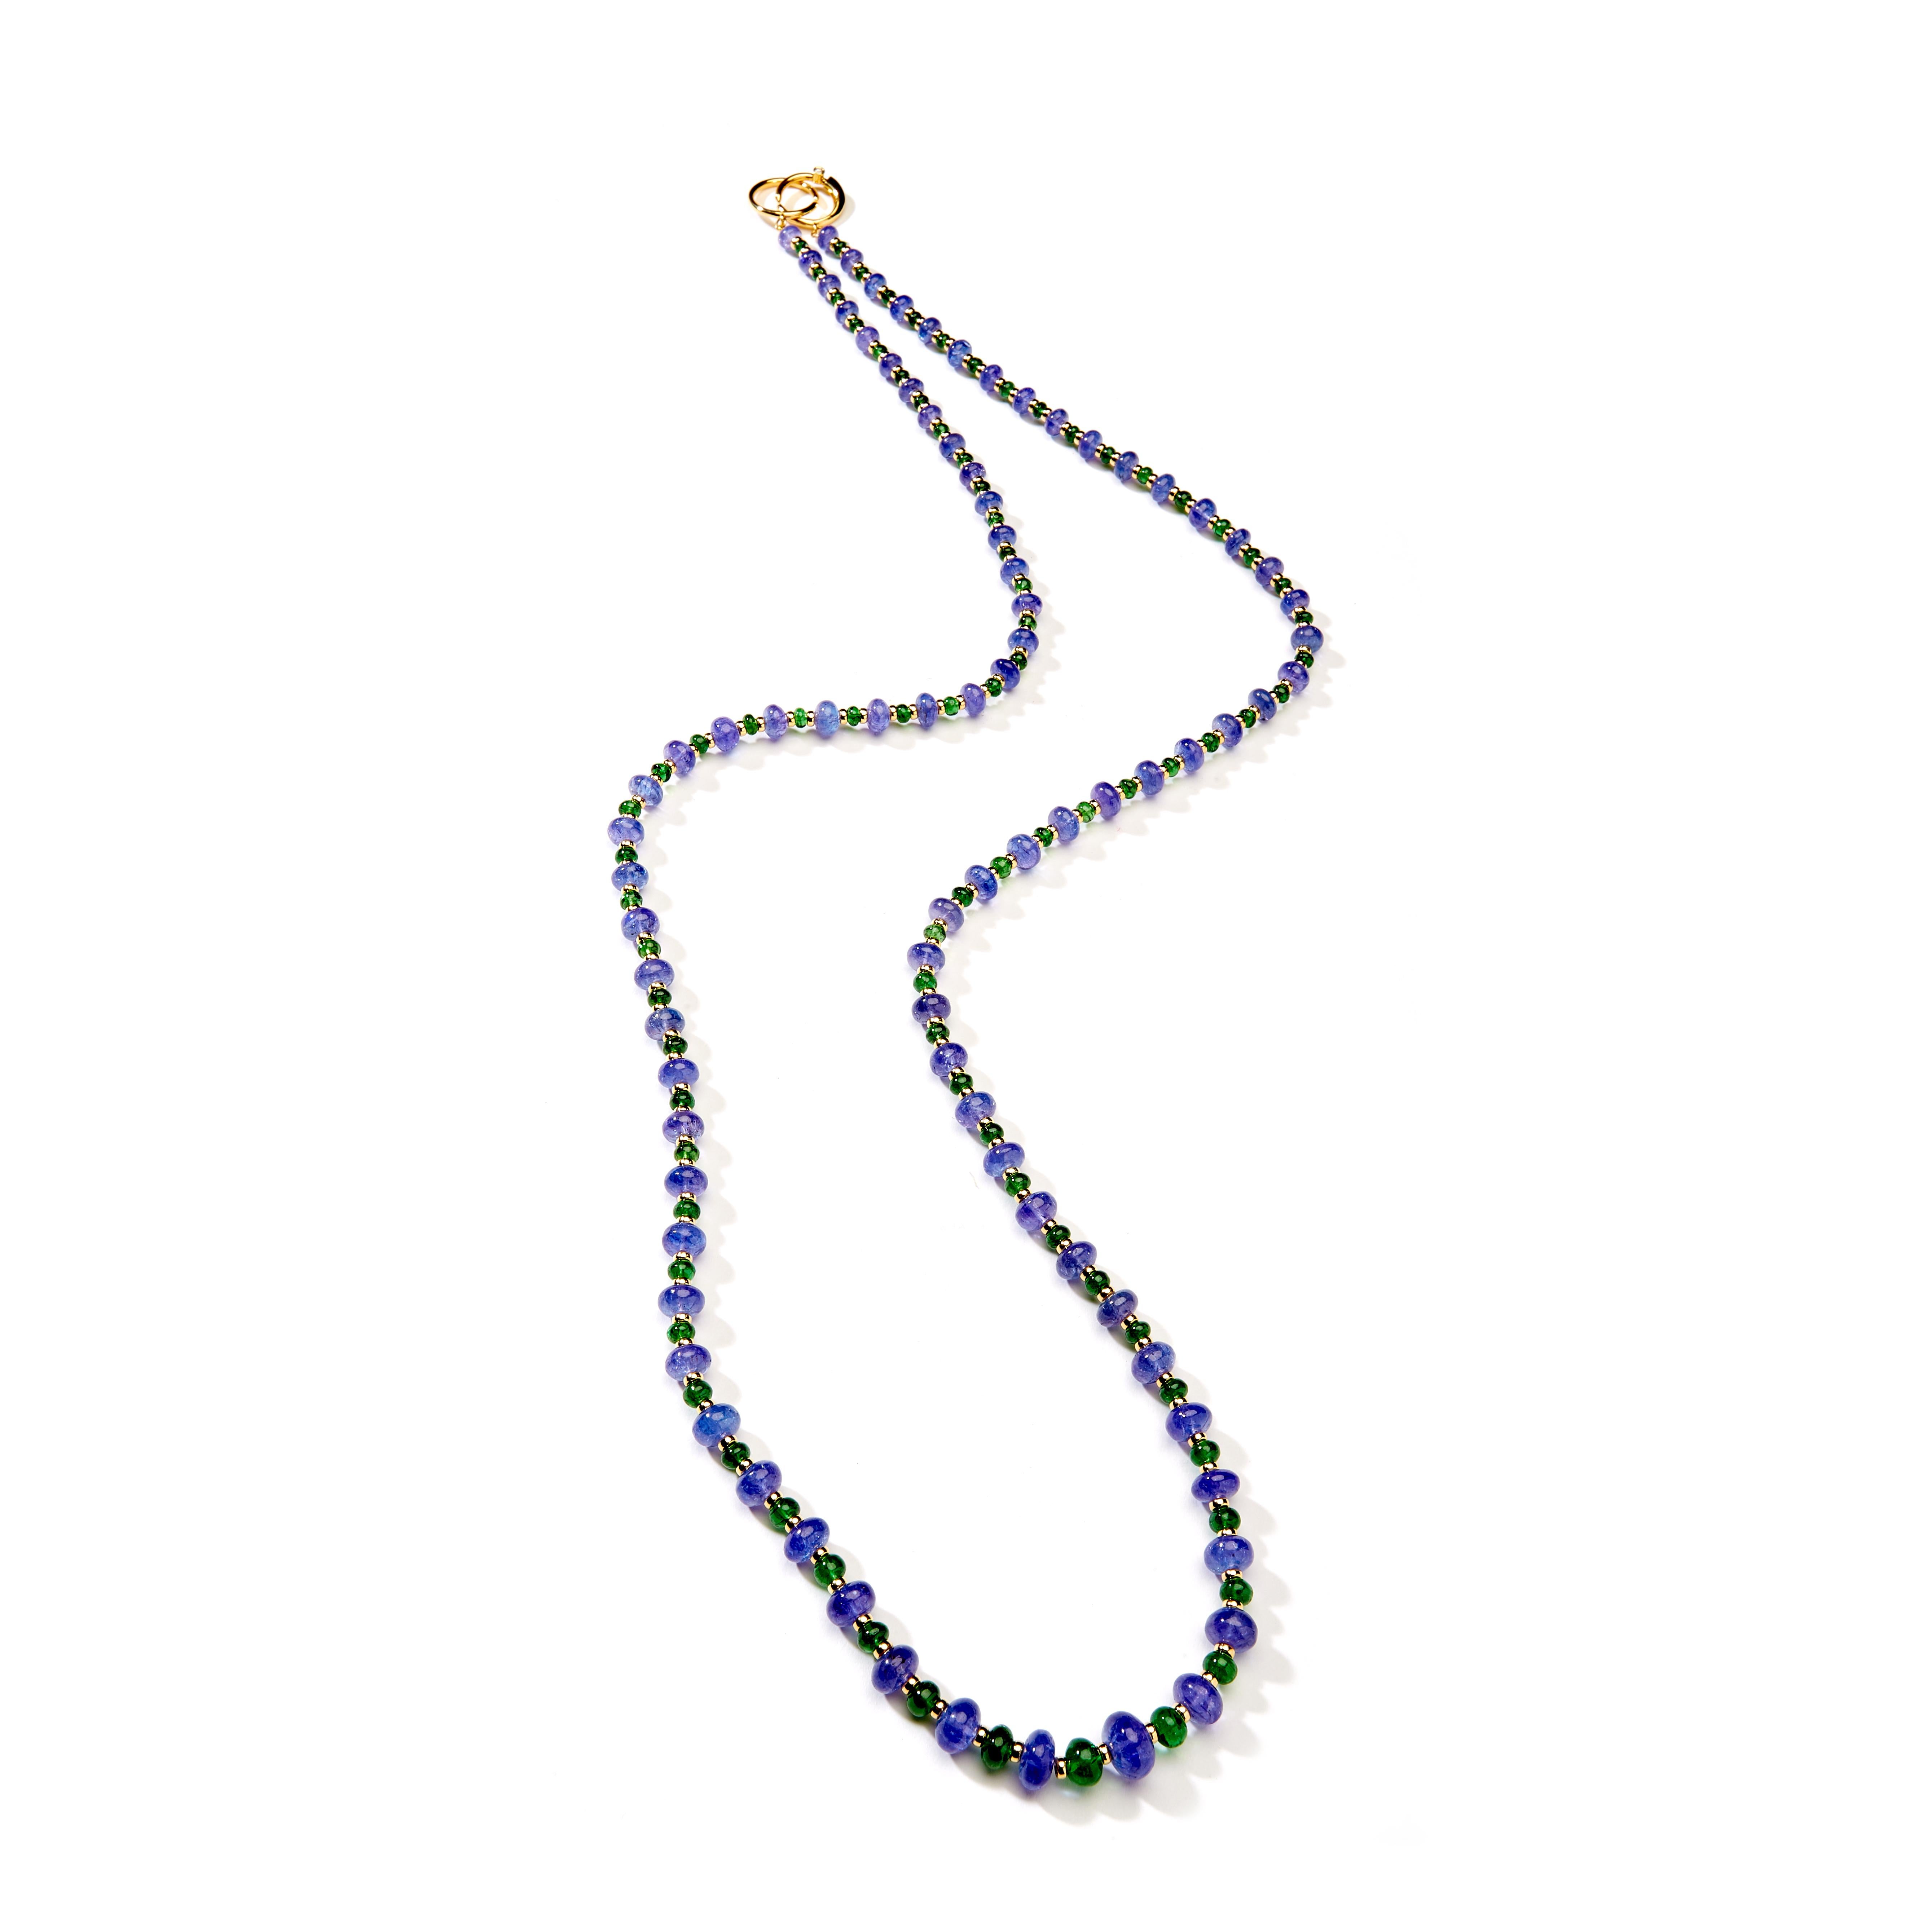 Created in 18 karat yellow gold
36 inch length
Tanzanite 300 carats approx.
Tsavorite 48 carats approx.
18kyg roundels 
18kyg ring clasp with diamond
Strung on silk
Limited edition

Fashioned from 18 karat yellow gold, this 36-inch necklace exudes